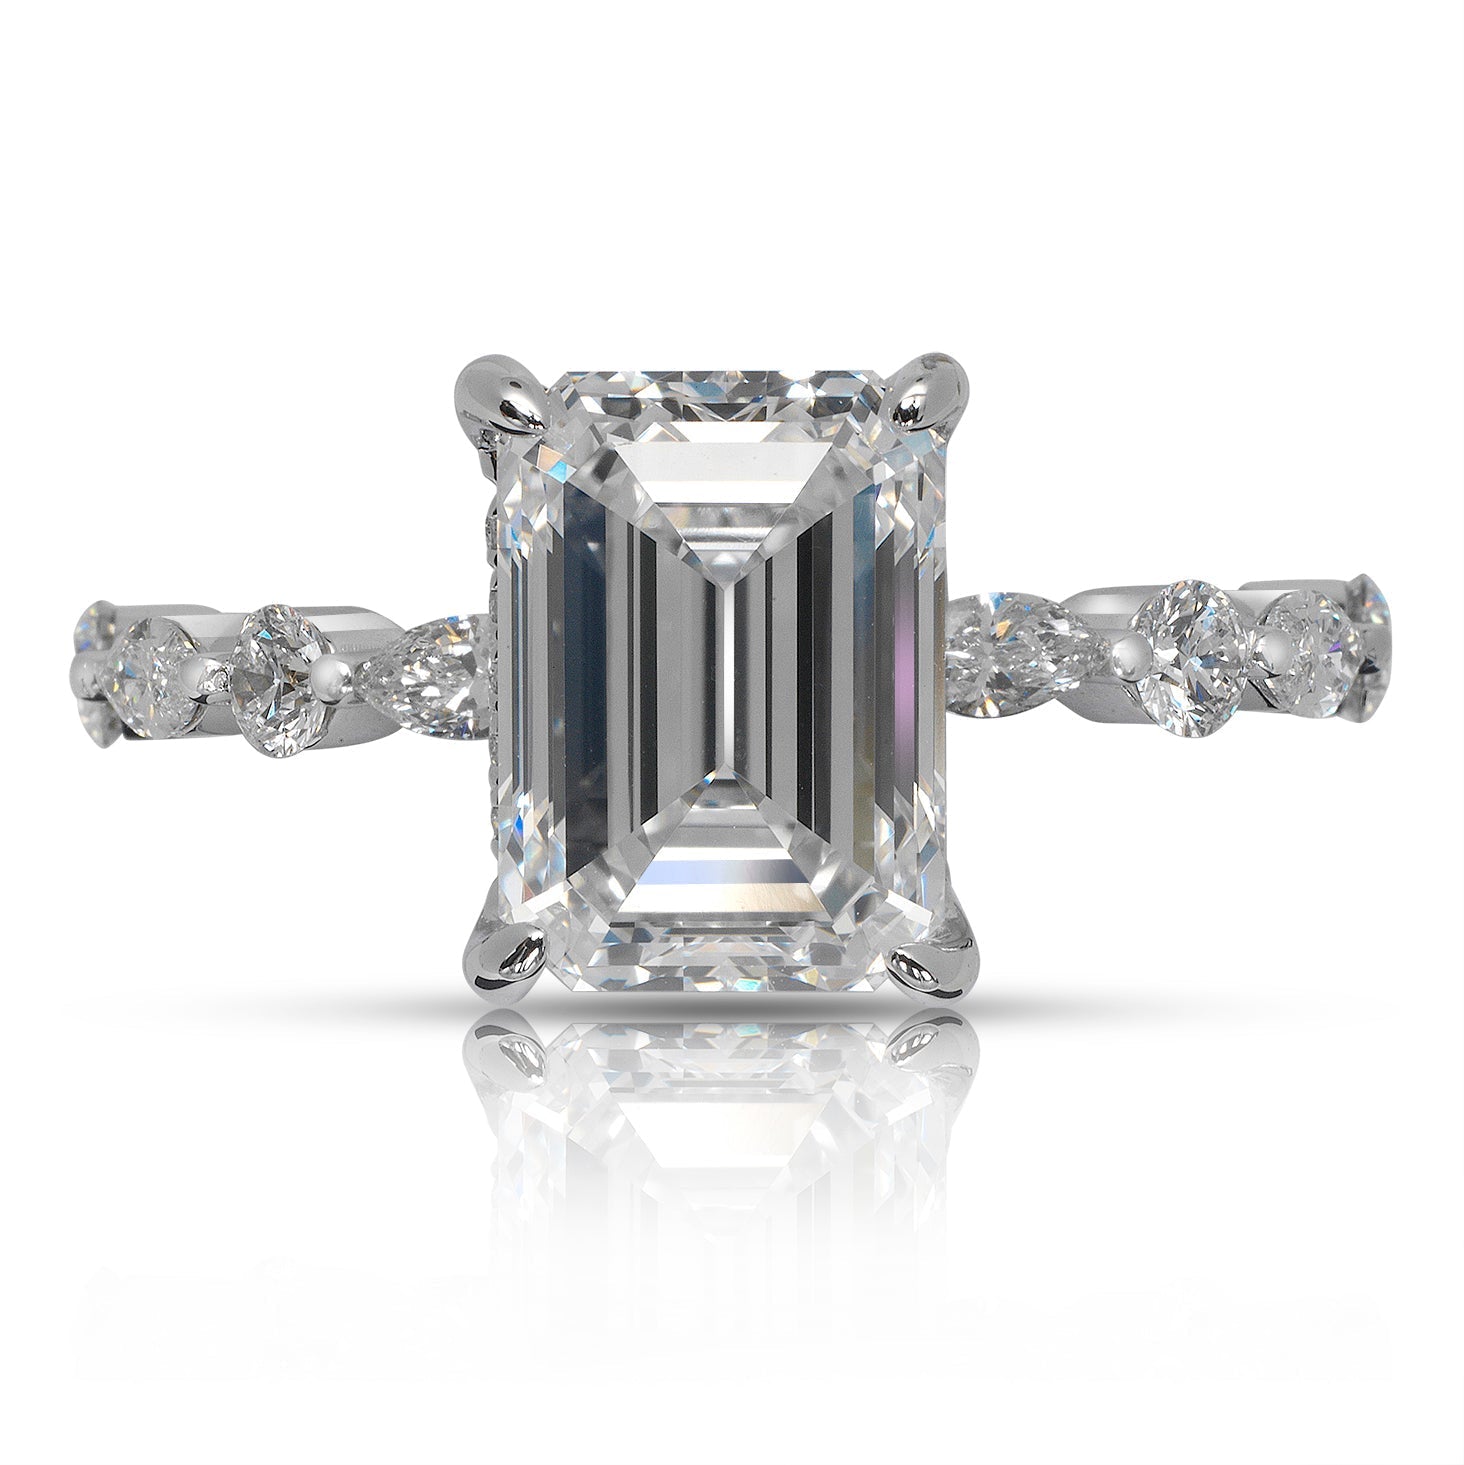 Diamond Ring Emerald Cut 4 carat Solitaire Ring in 18K White Gold Front View